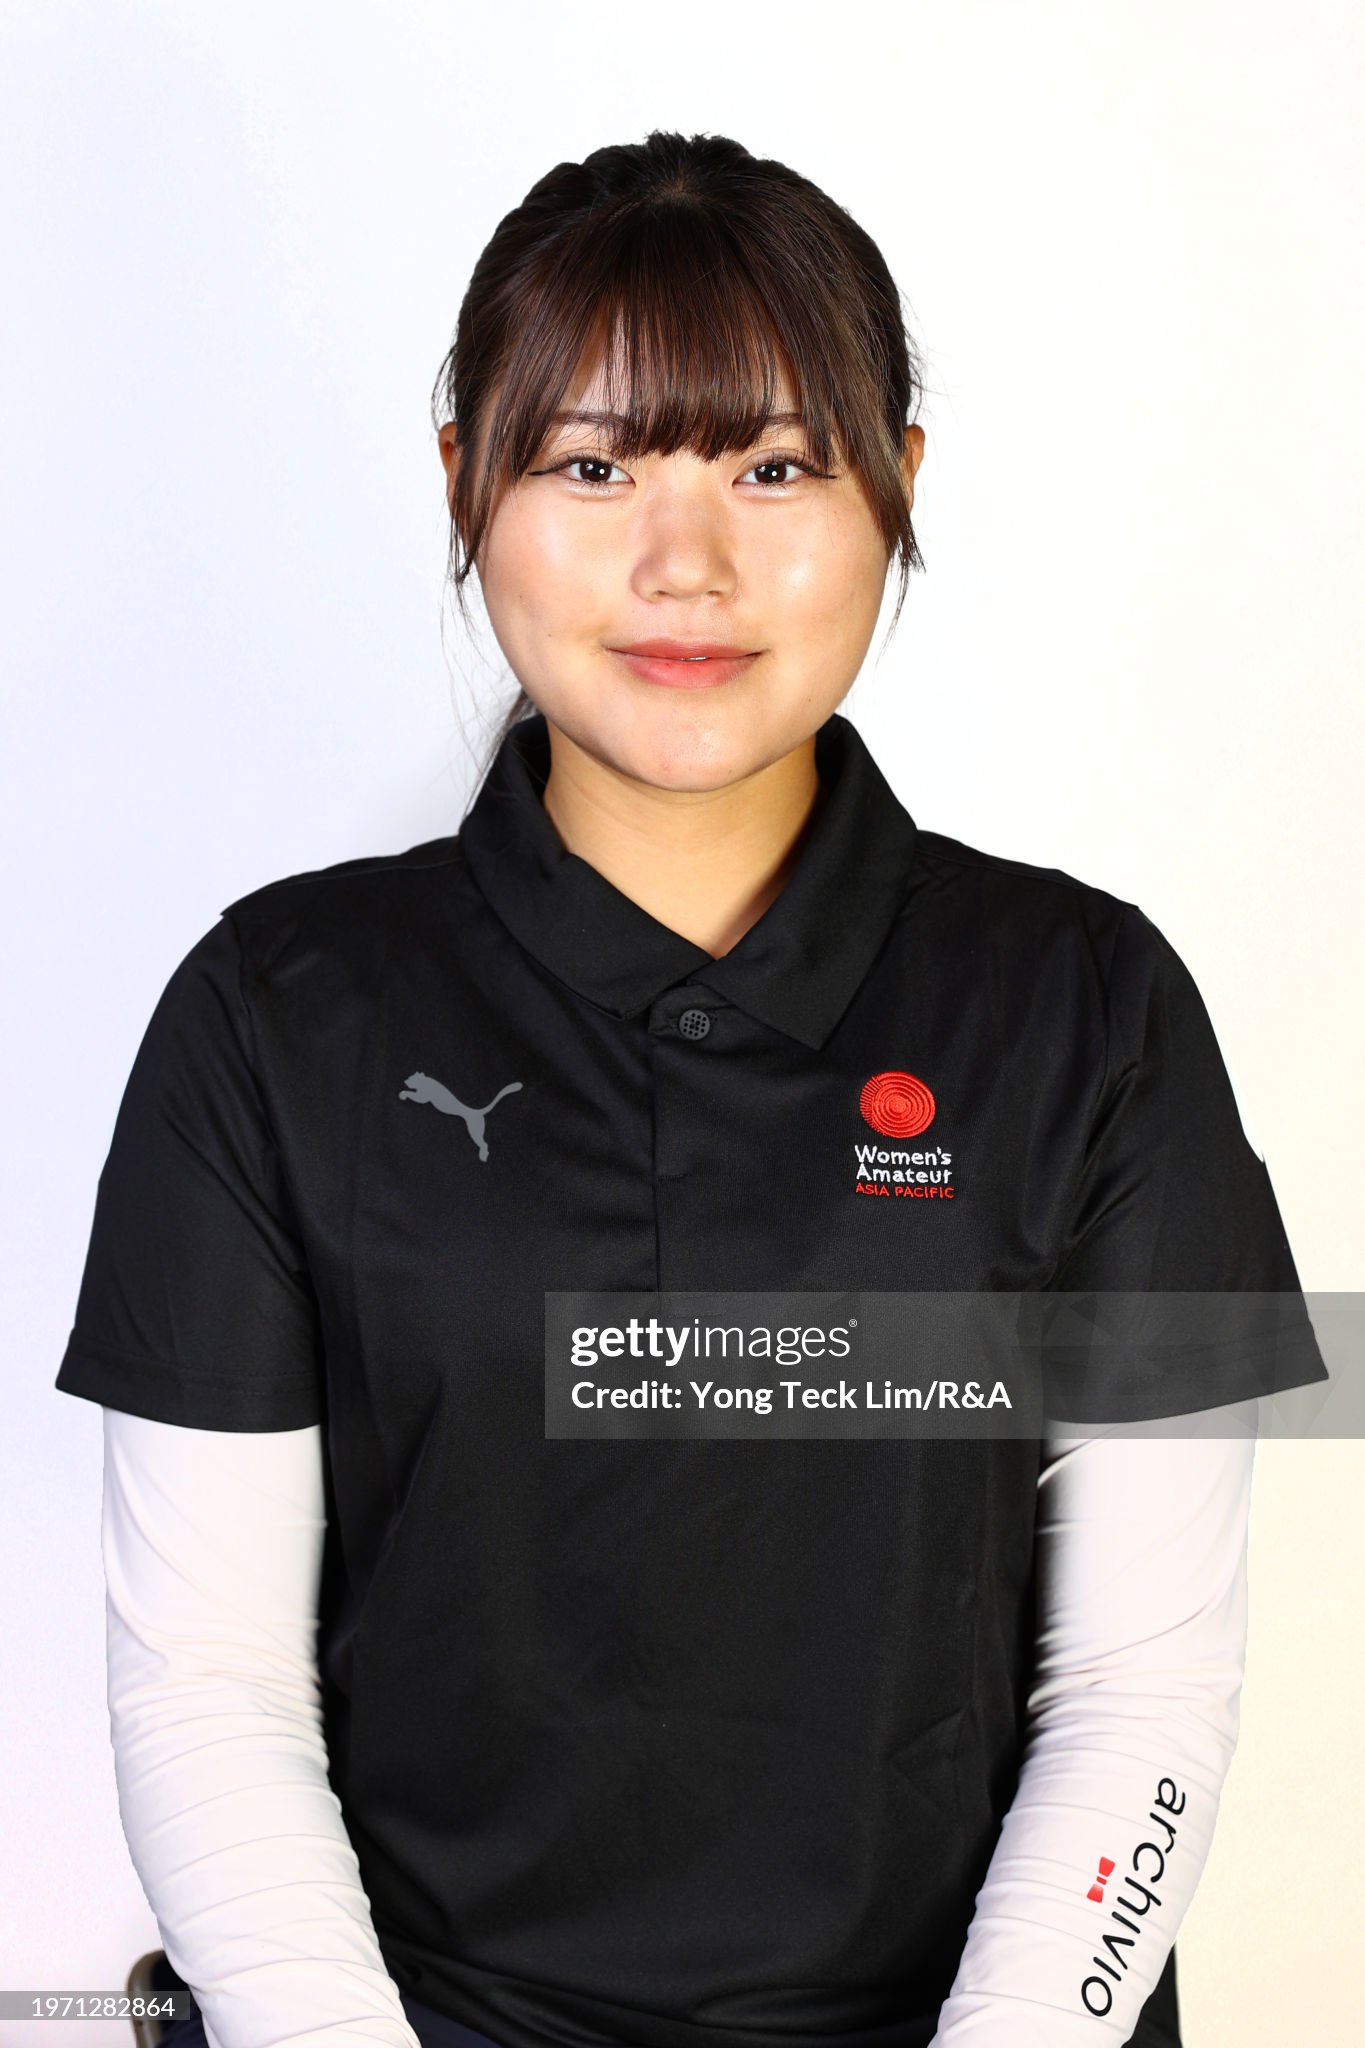 https://media.gettyimages.com/id/1971282864/photo/the-womens-amateur-asia-pacific-championship-previews.jpg?s=2048x2048&w=gi&k=20&c=SN6DqrNG2n8sgf81KFn-wHukYwMRHSPLuOQF3VtQLcE=